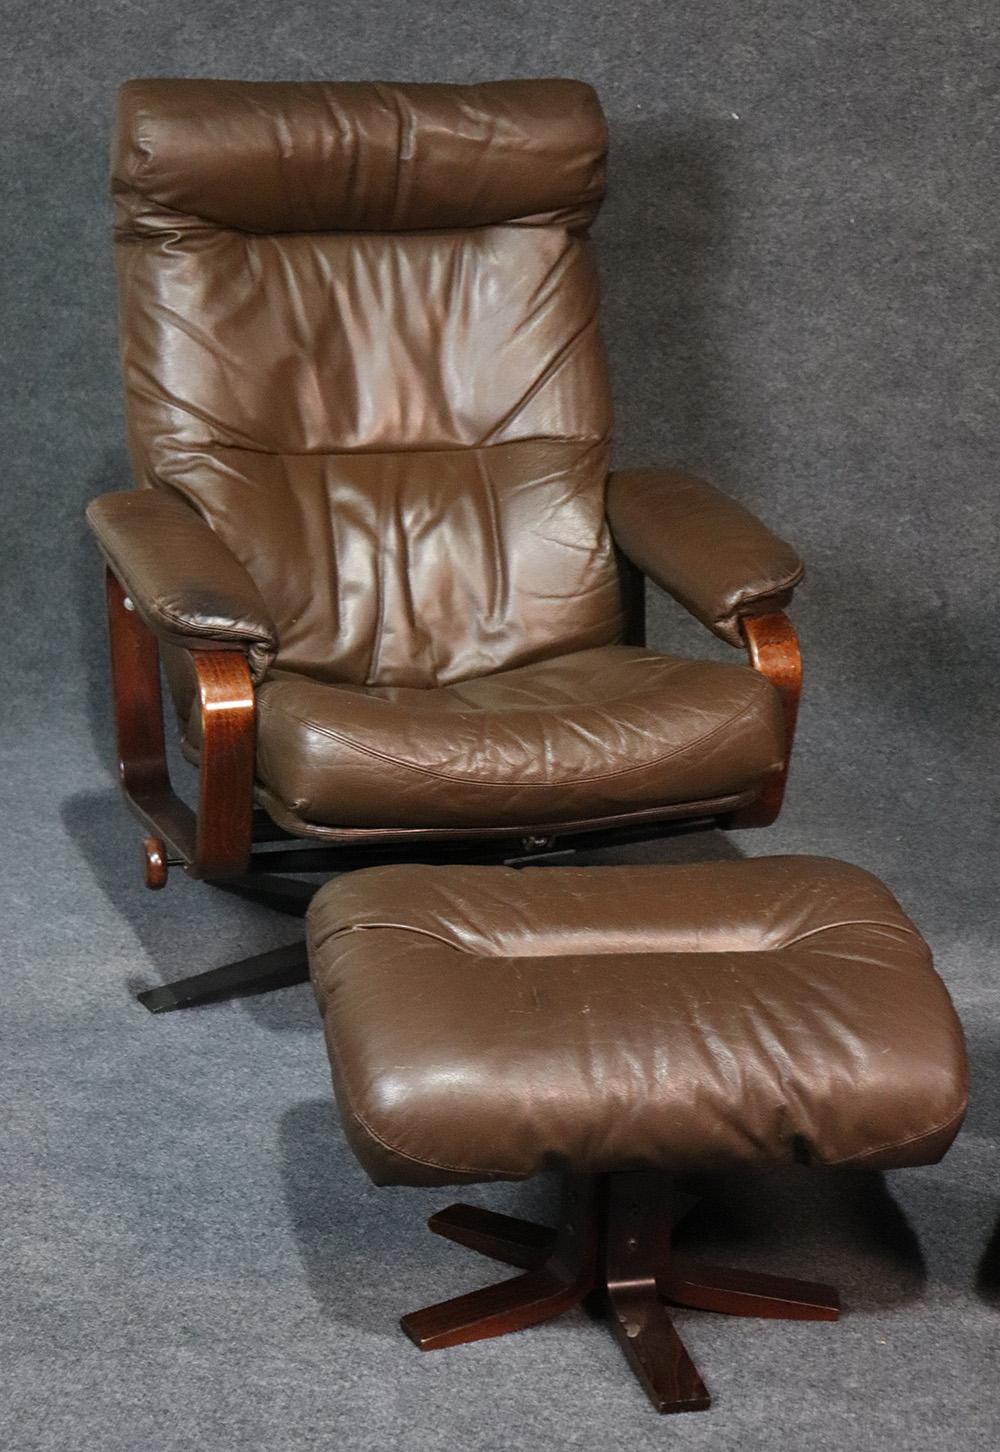 Measures: 41 tall x 31 wide, 30 deep, seat 19 inches

Ottomans 16 tall x 24 wide x 16 deep

This is a gorgeous pair of brown leather Danish modern reclining chairs. The leather is distessed from age but is actually in fairly good condition! They